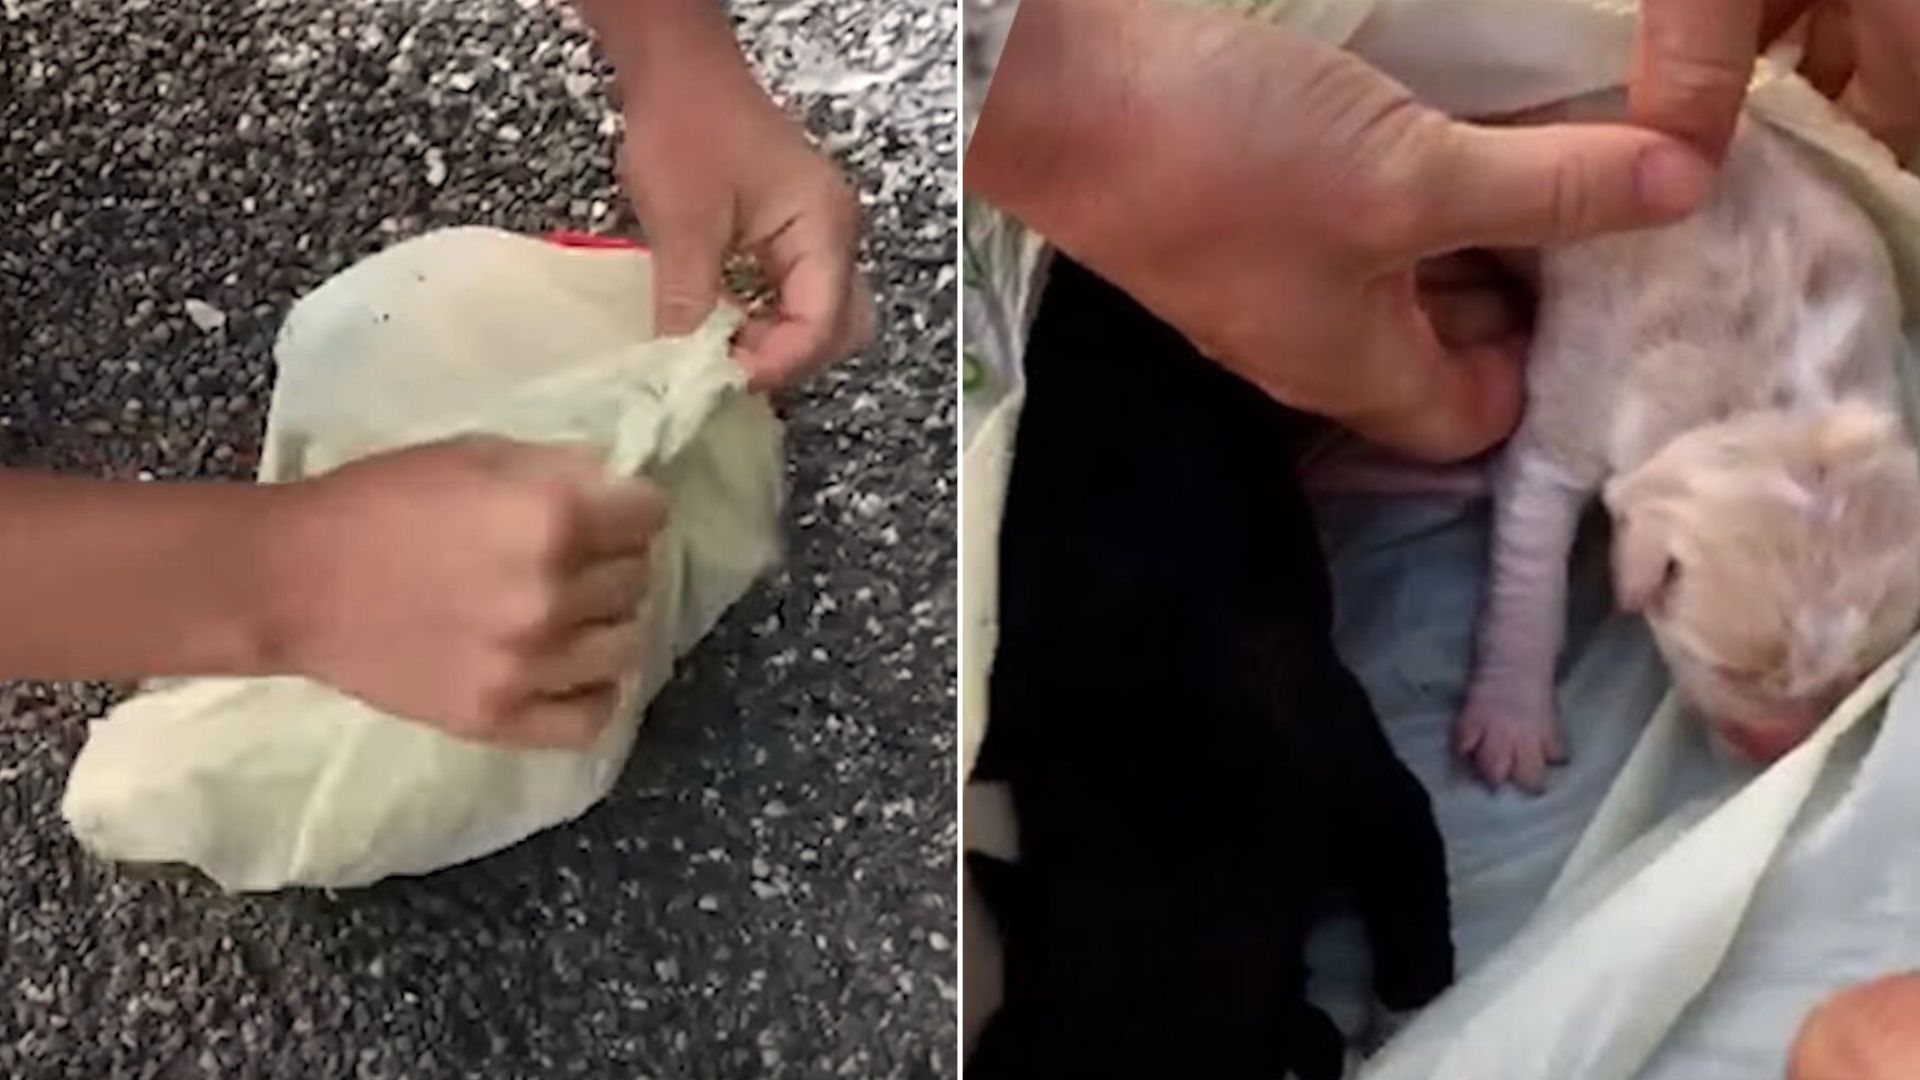 What This Woman Found Inside A Plastic Bag In Bushes Will Shock You